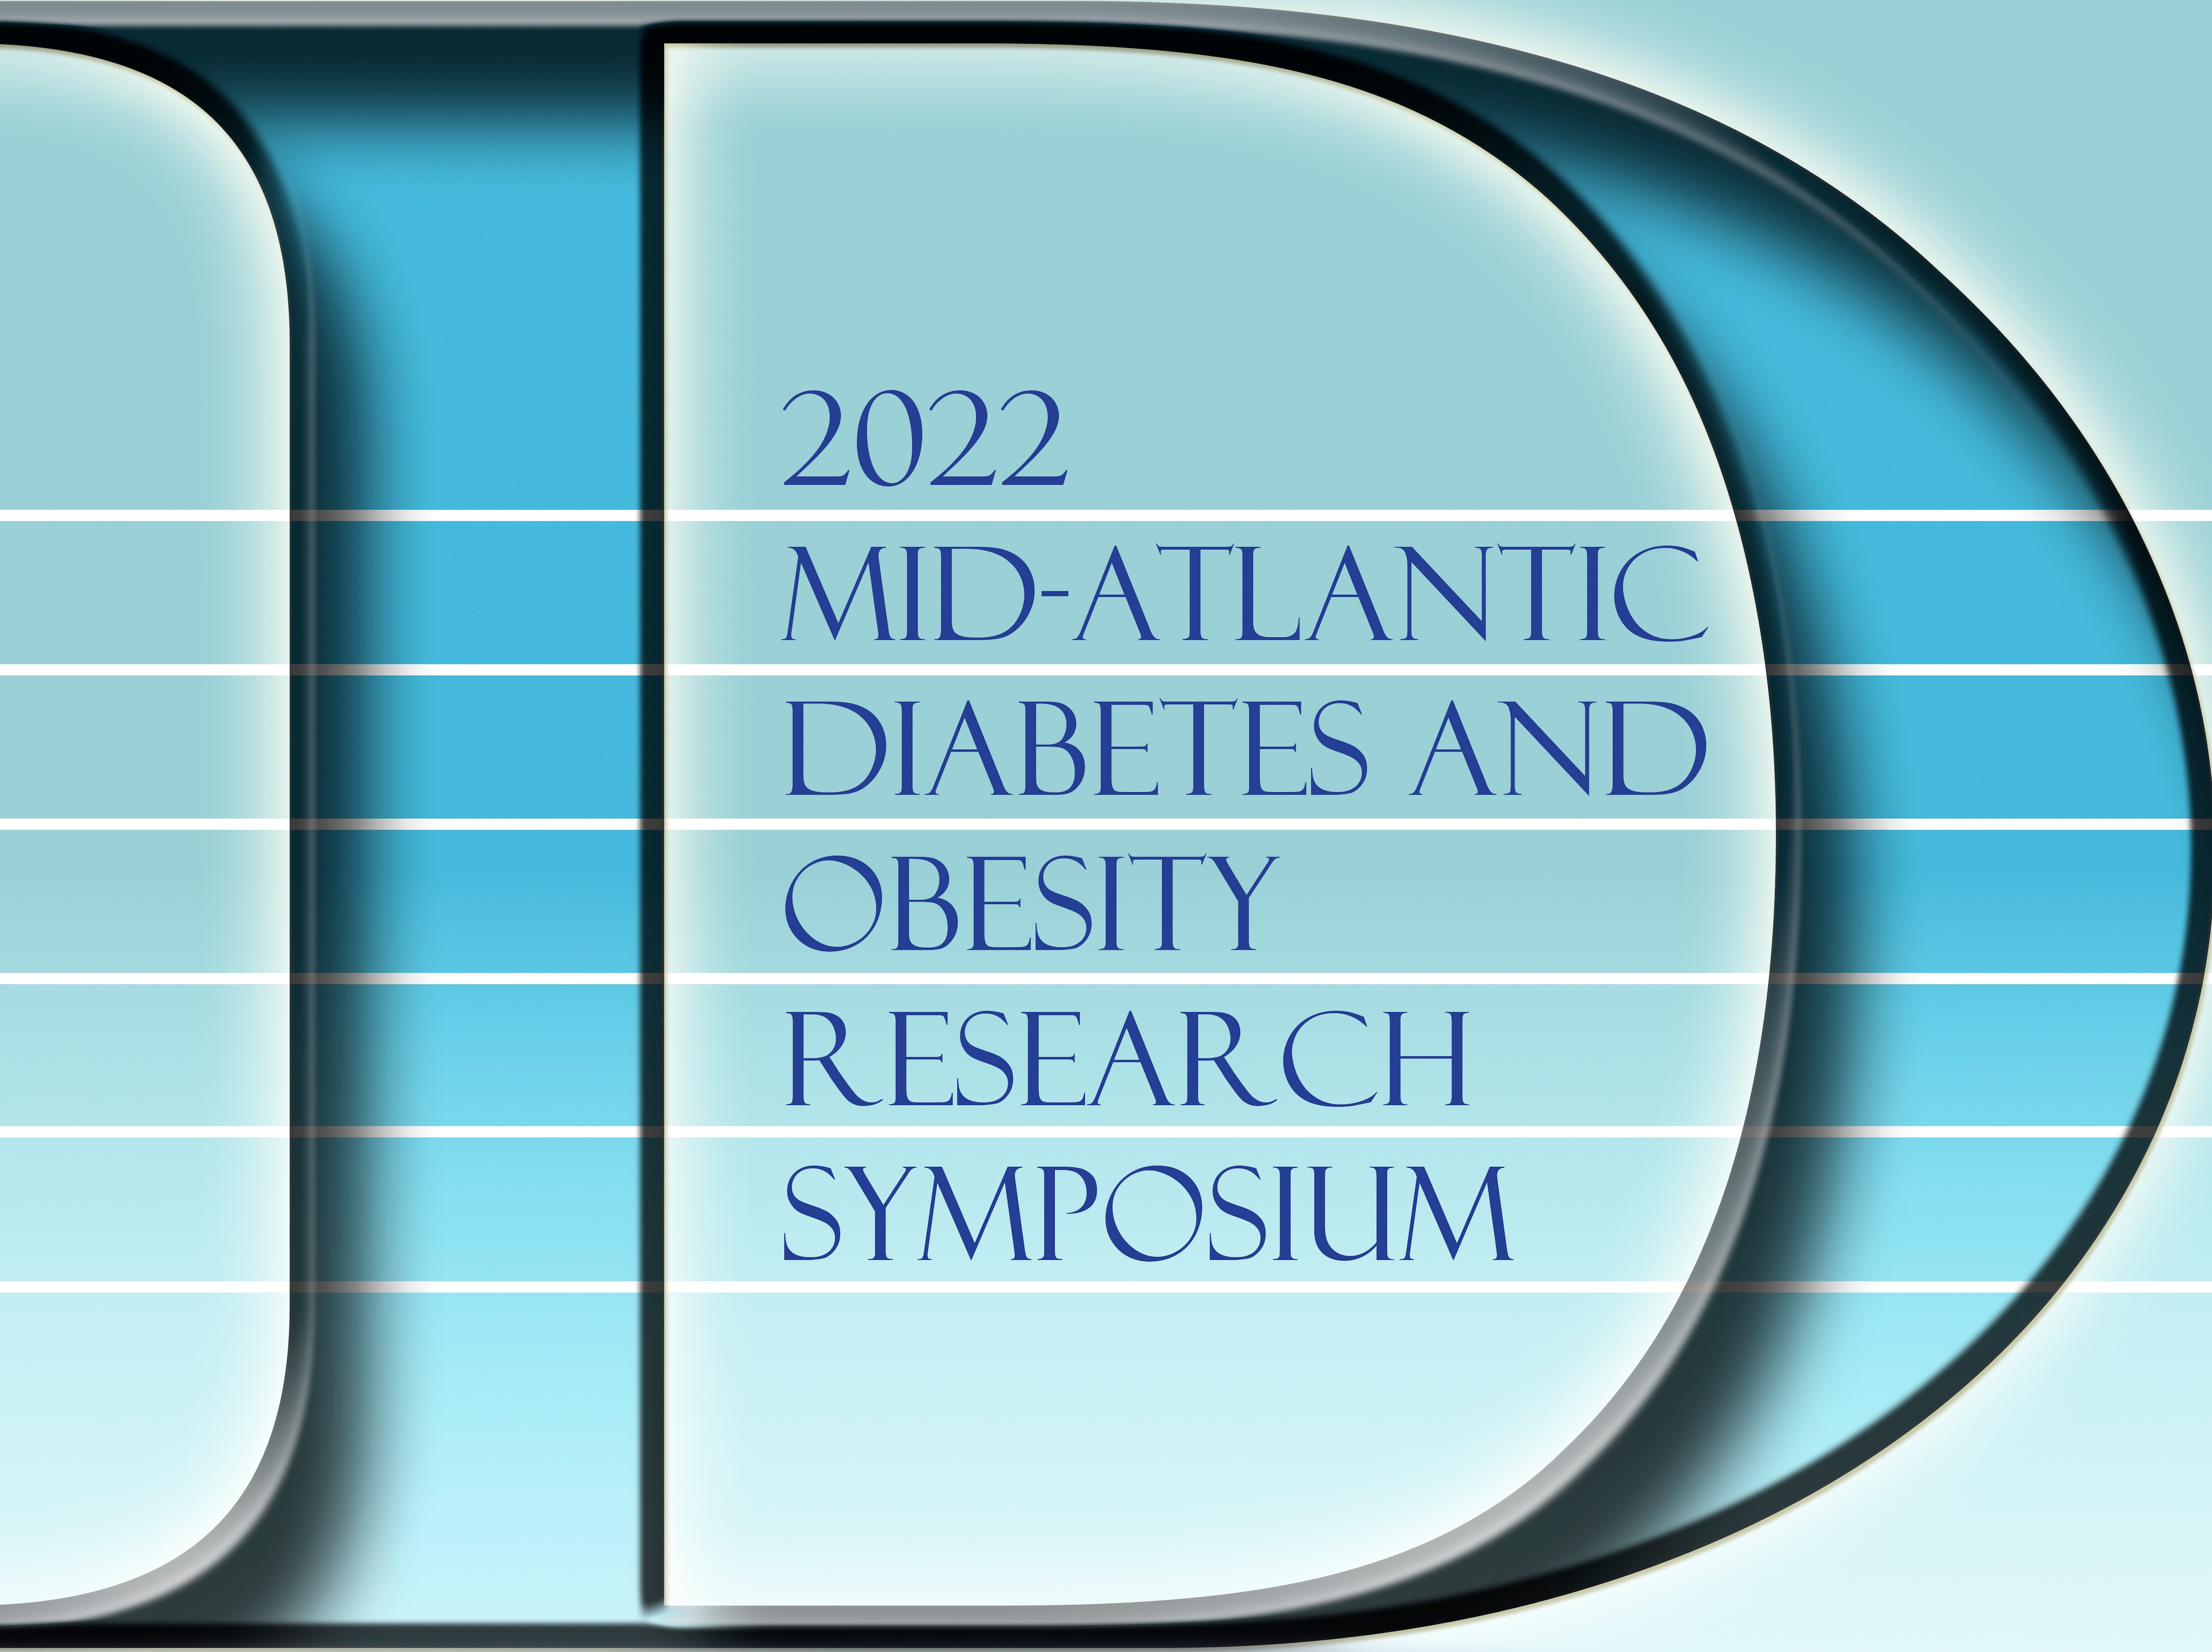 2022 Mid-Atlantic Diabetes and Obesity Research Symposium Rollup Image